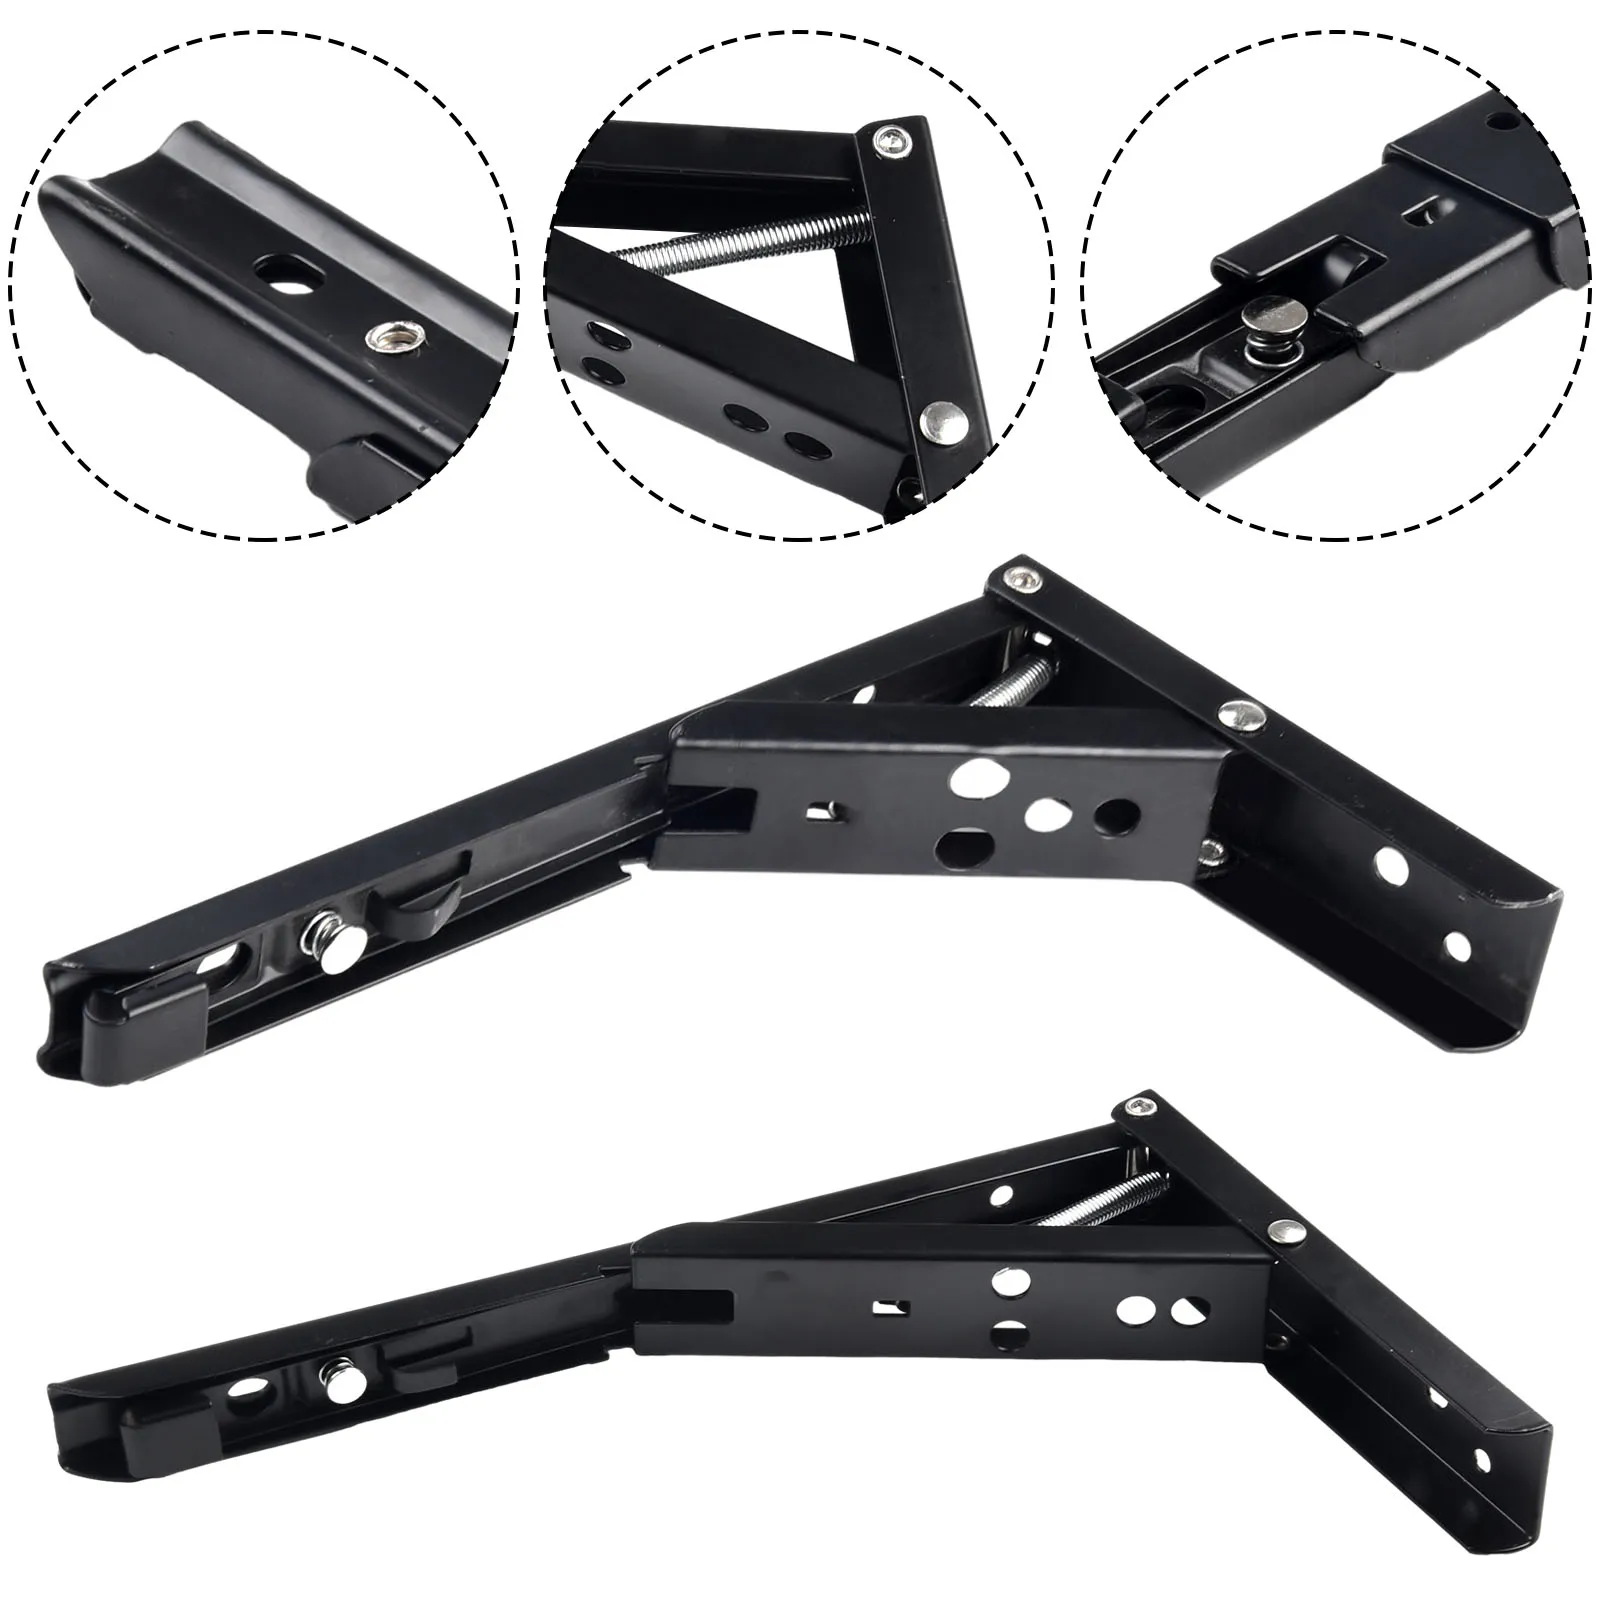 

1pc DIY Stainless Steel Folding Shelf Brackets Collapsible Hinge Accessories For Work Bench Black F-style Triangular Partition